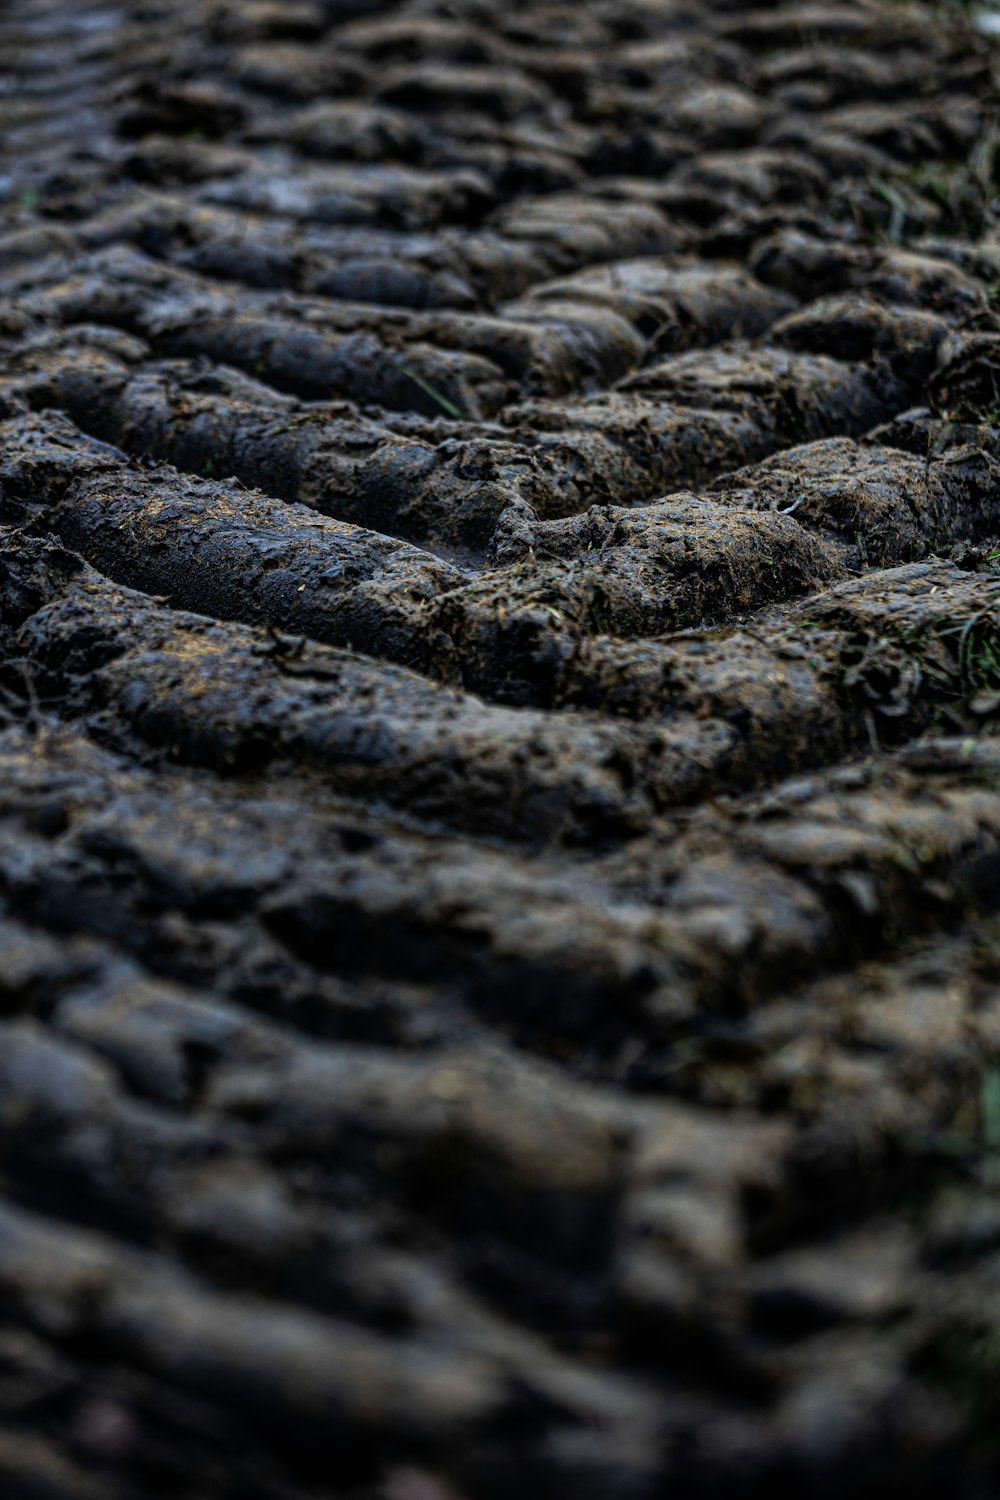 a close up of a tire on the ground